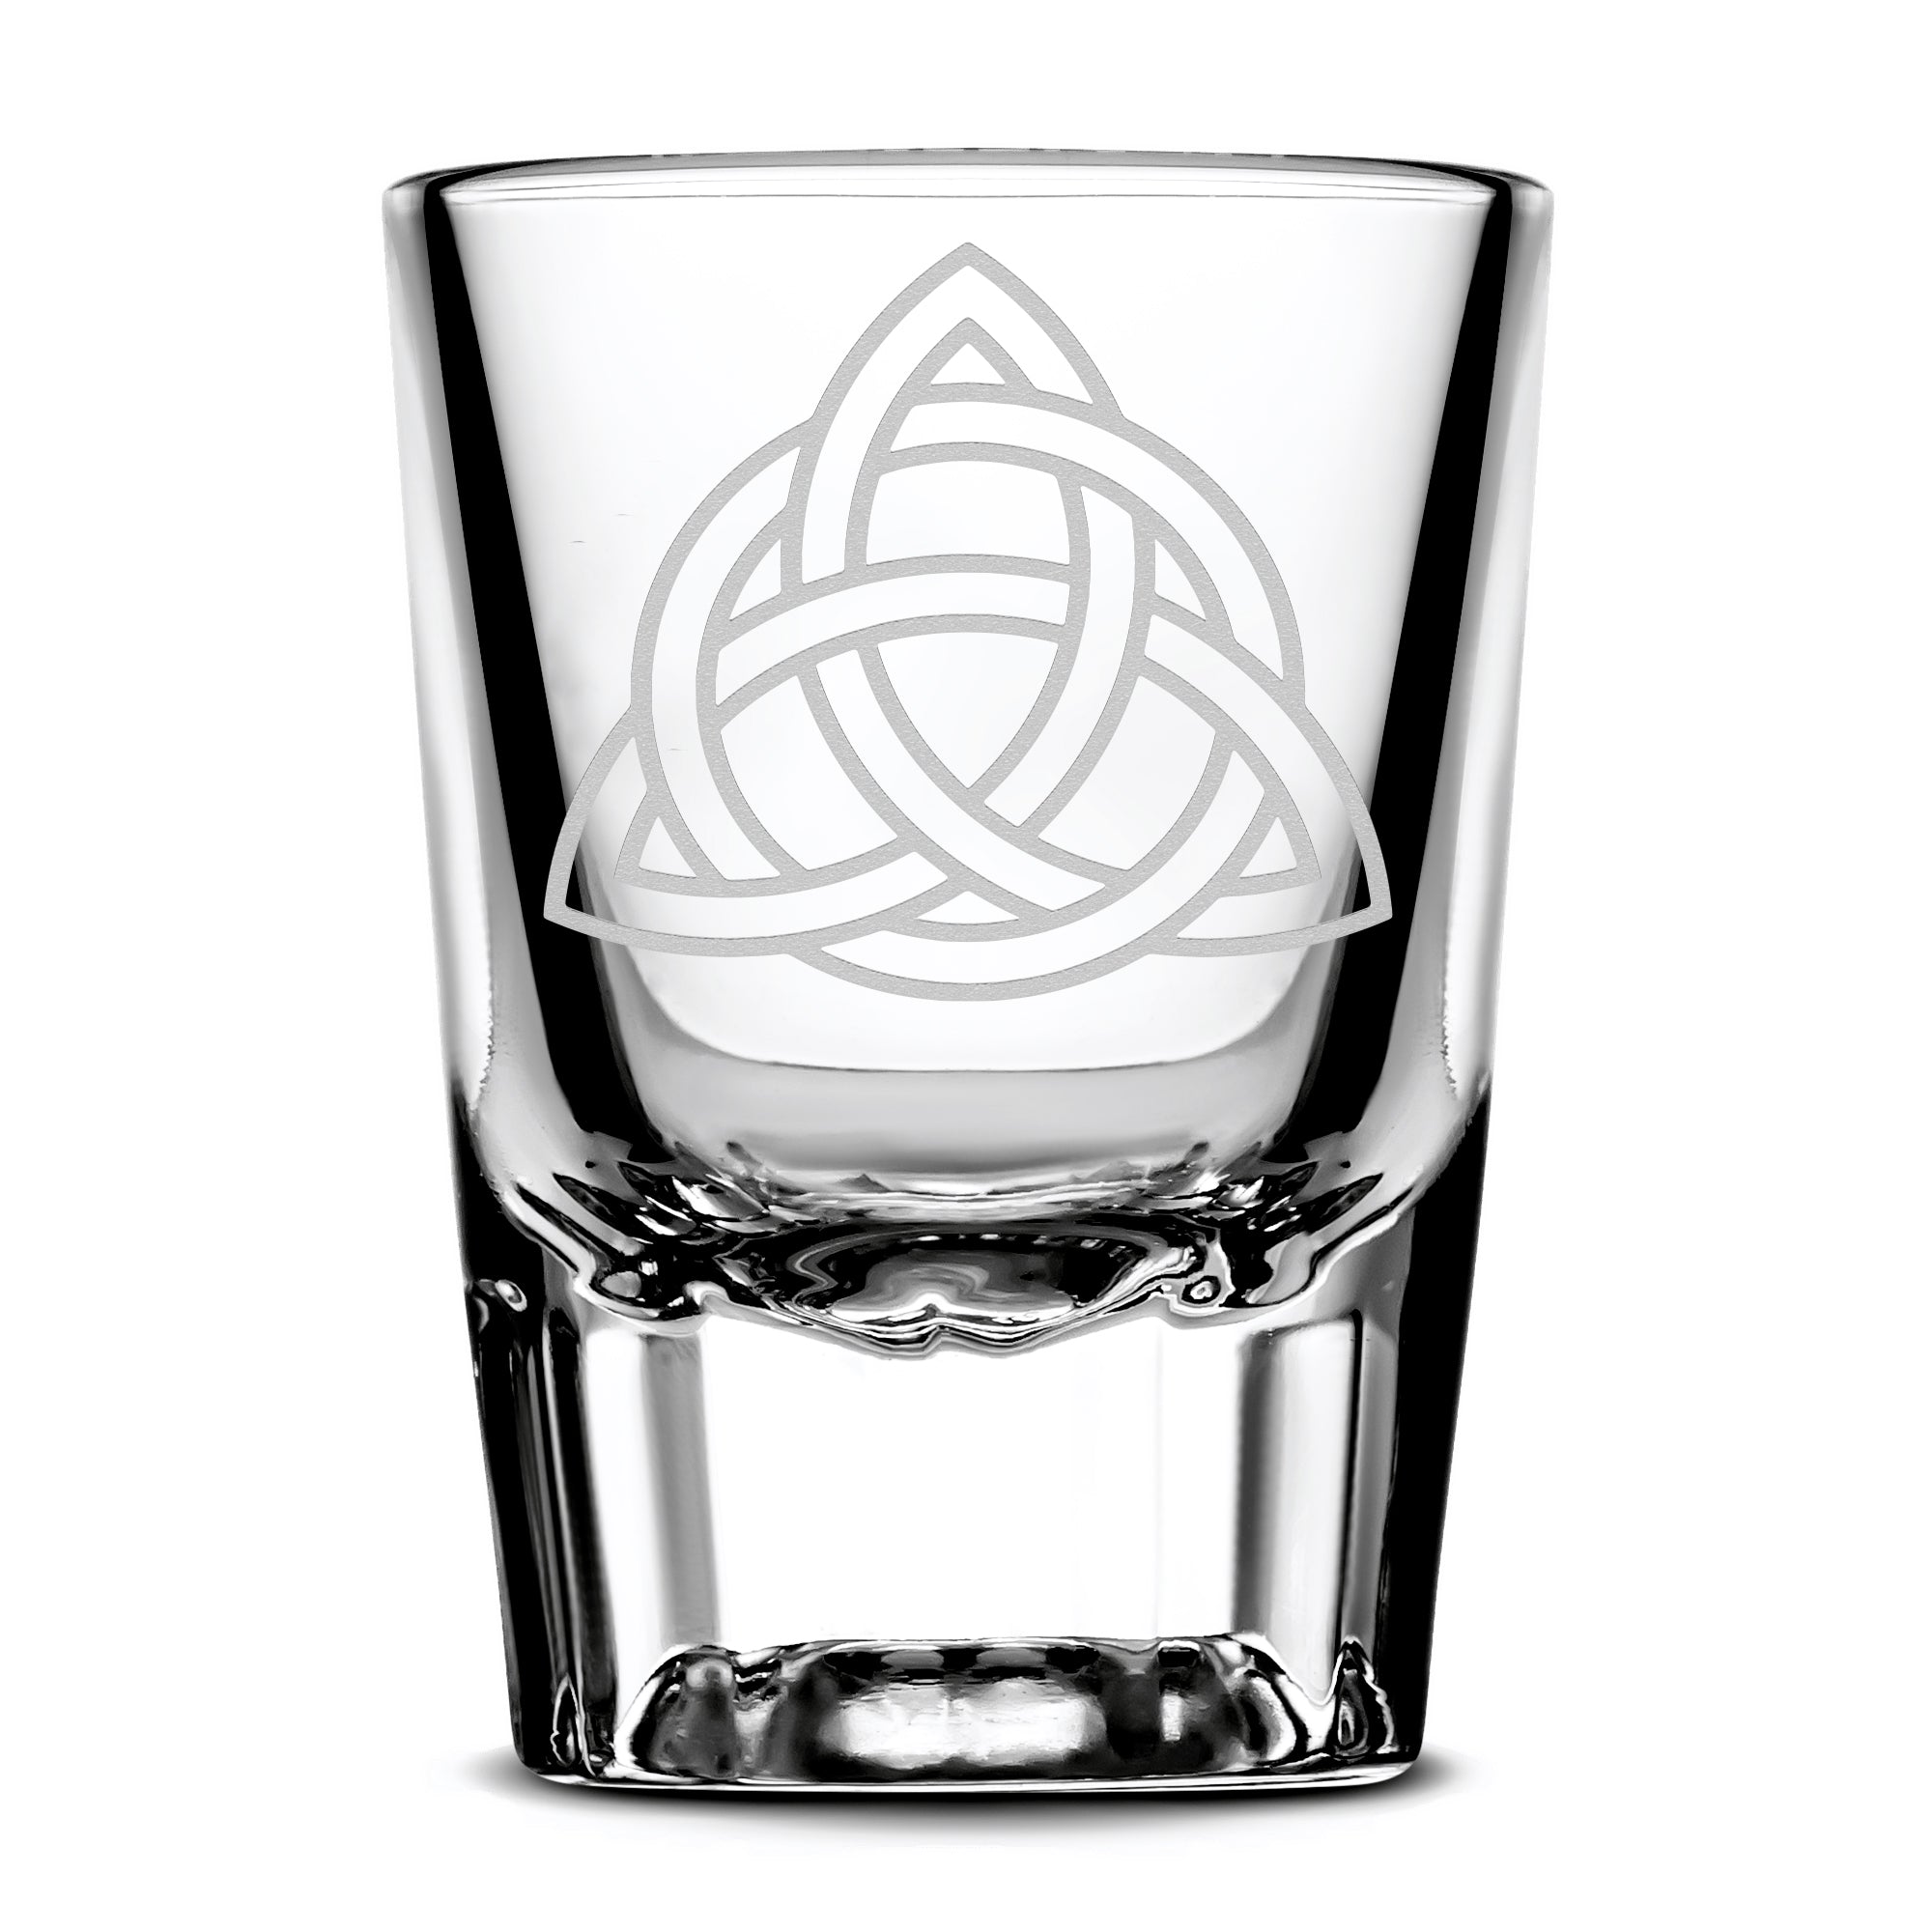 Premium Etched Shot Glass, Celtic Trinity, 2oz, Laser Etched or Hand Etched